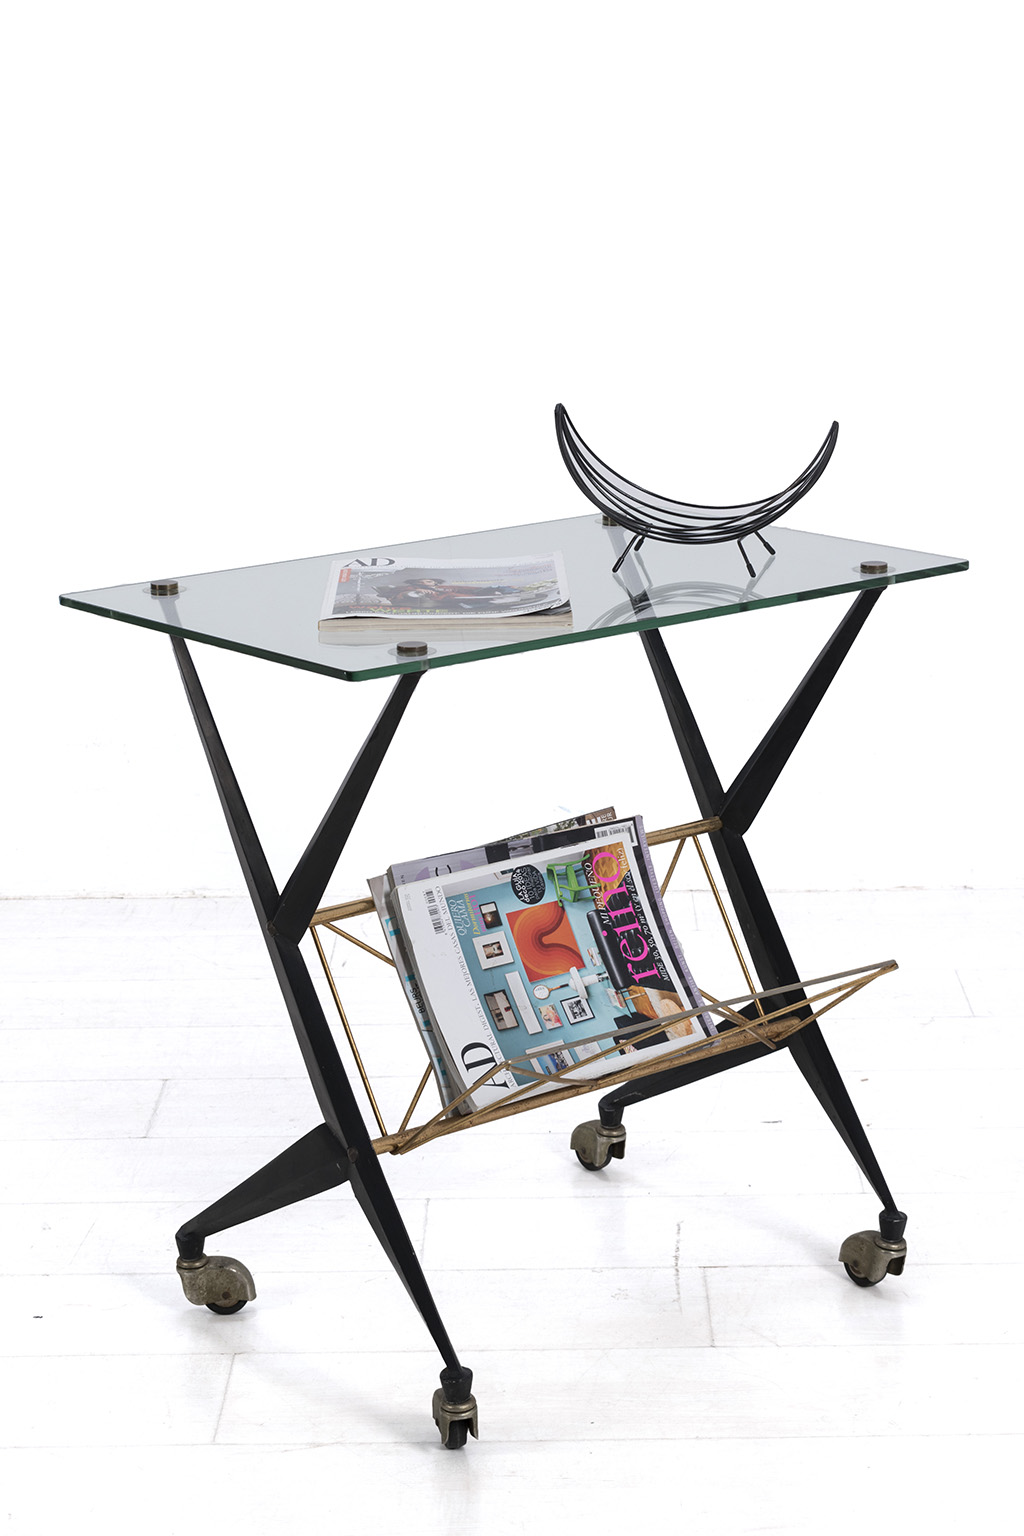 1950’s side table with magazine holder